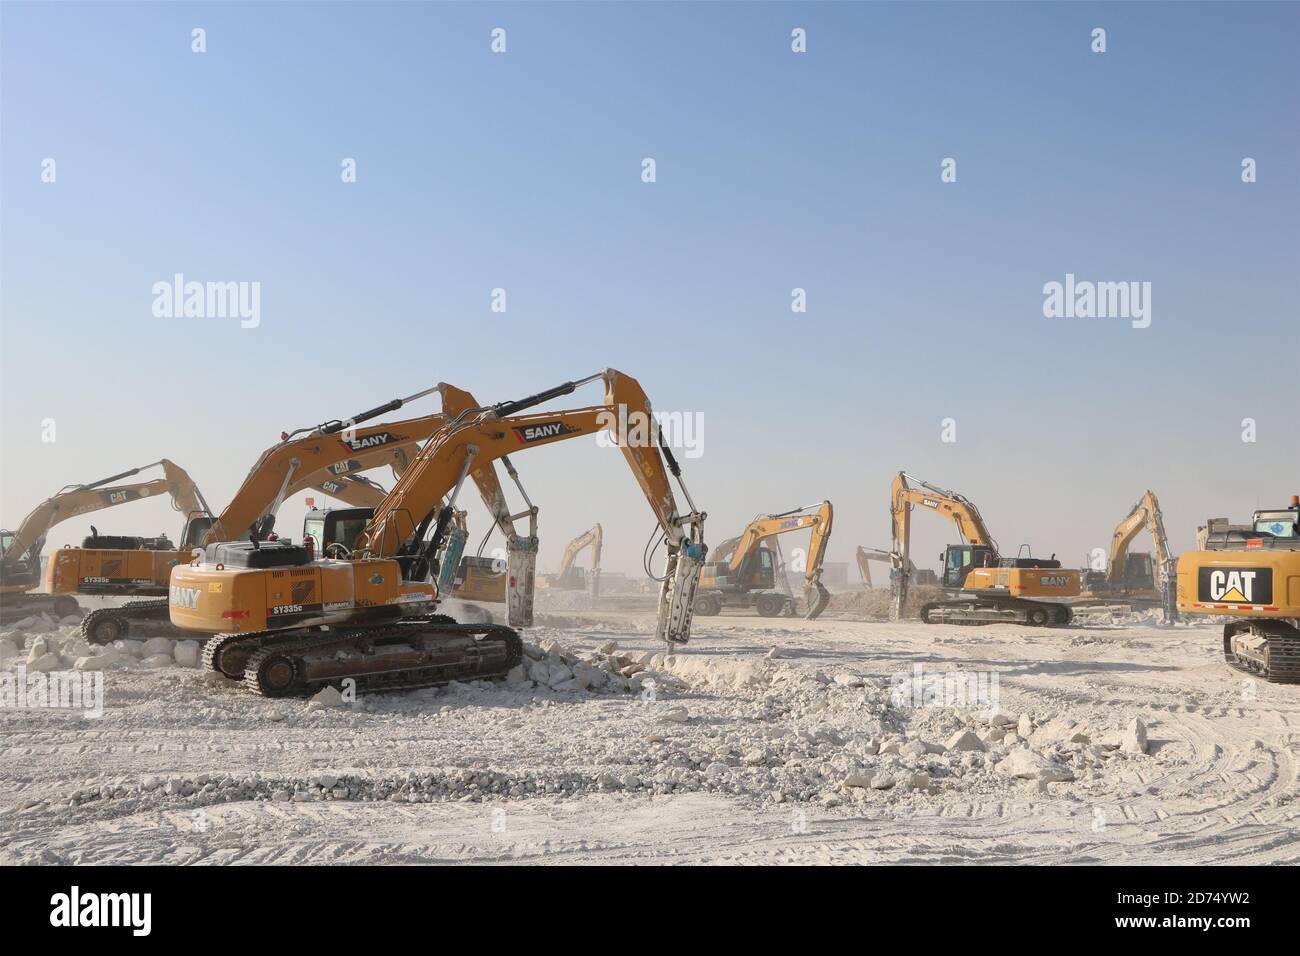 Jahra Governorate, Kuwait. 18th Oct, 2020. Construction machines work at the construction site of a project of China Gezhouba Group Corporation (CGGC) in desert of Jahra Governorate, Kuwait, Oct. 18, 2020. China Gezhouba Group Corporation (CGGC) handed over on Tuesday the first batch of its housing infrastructure project to the Kuwaiti side, injecting new momentum into Kuwait's economy and livelihood. Credit: Liu Lianghaoyue/Xinhua/Alamy Live News Stock Photo